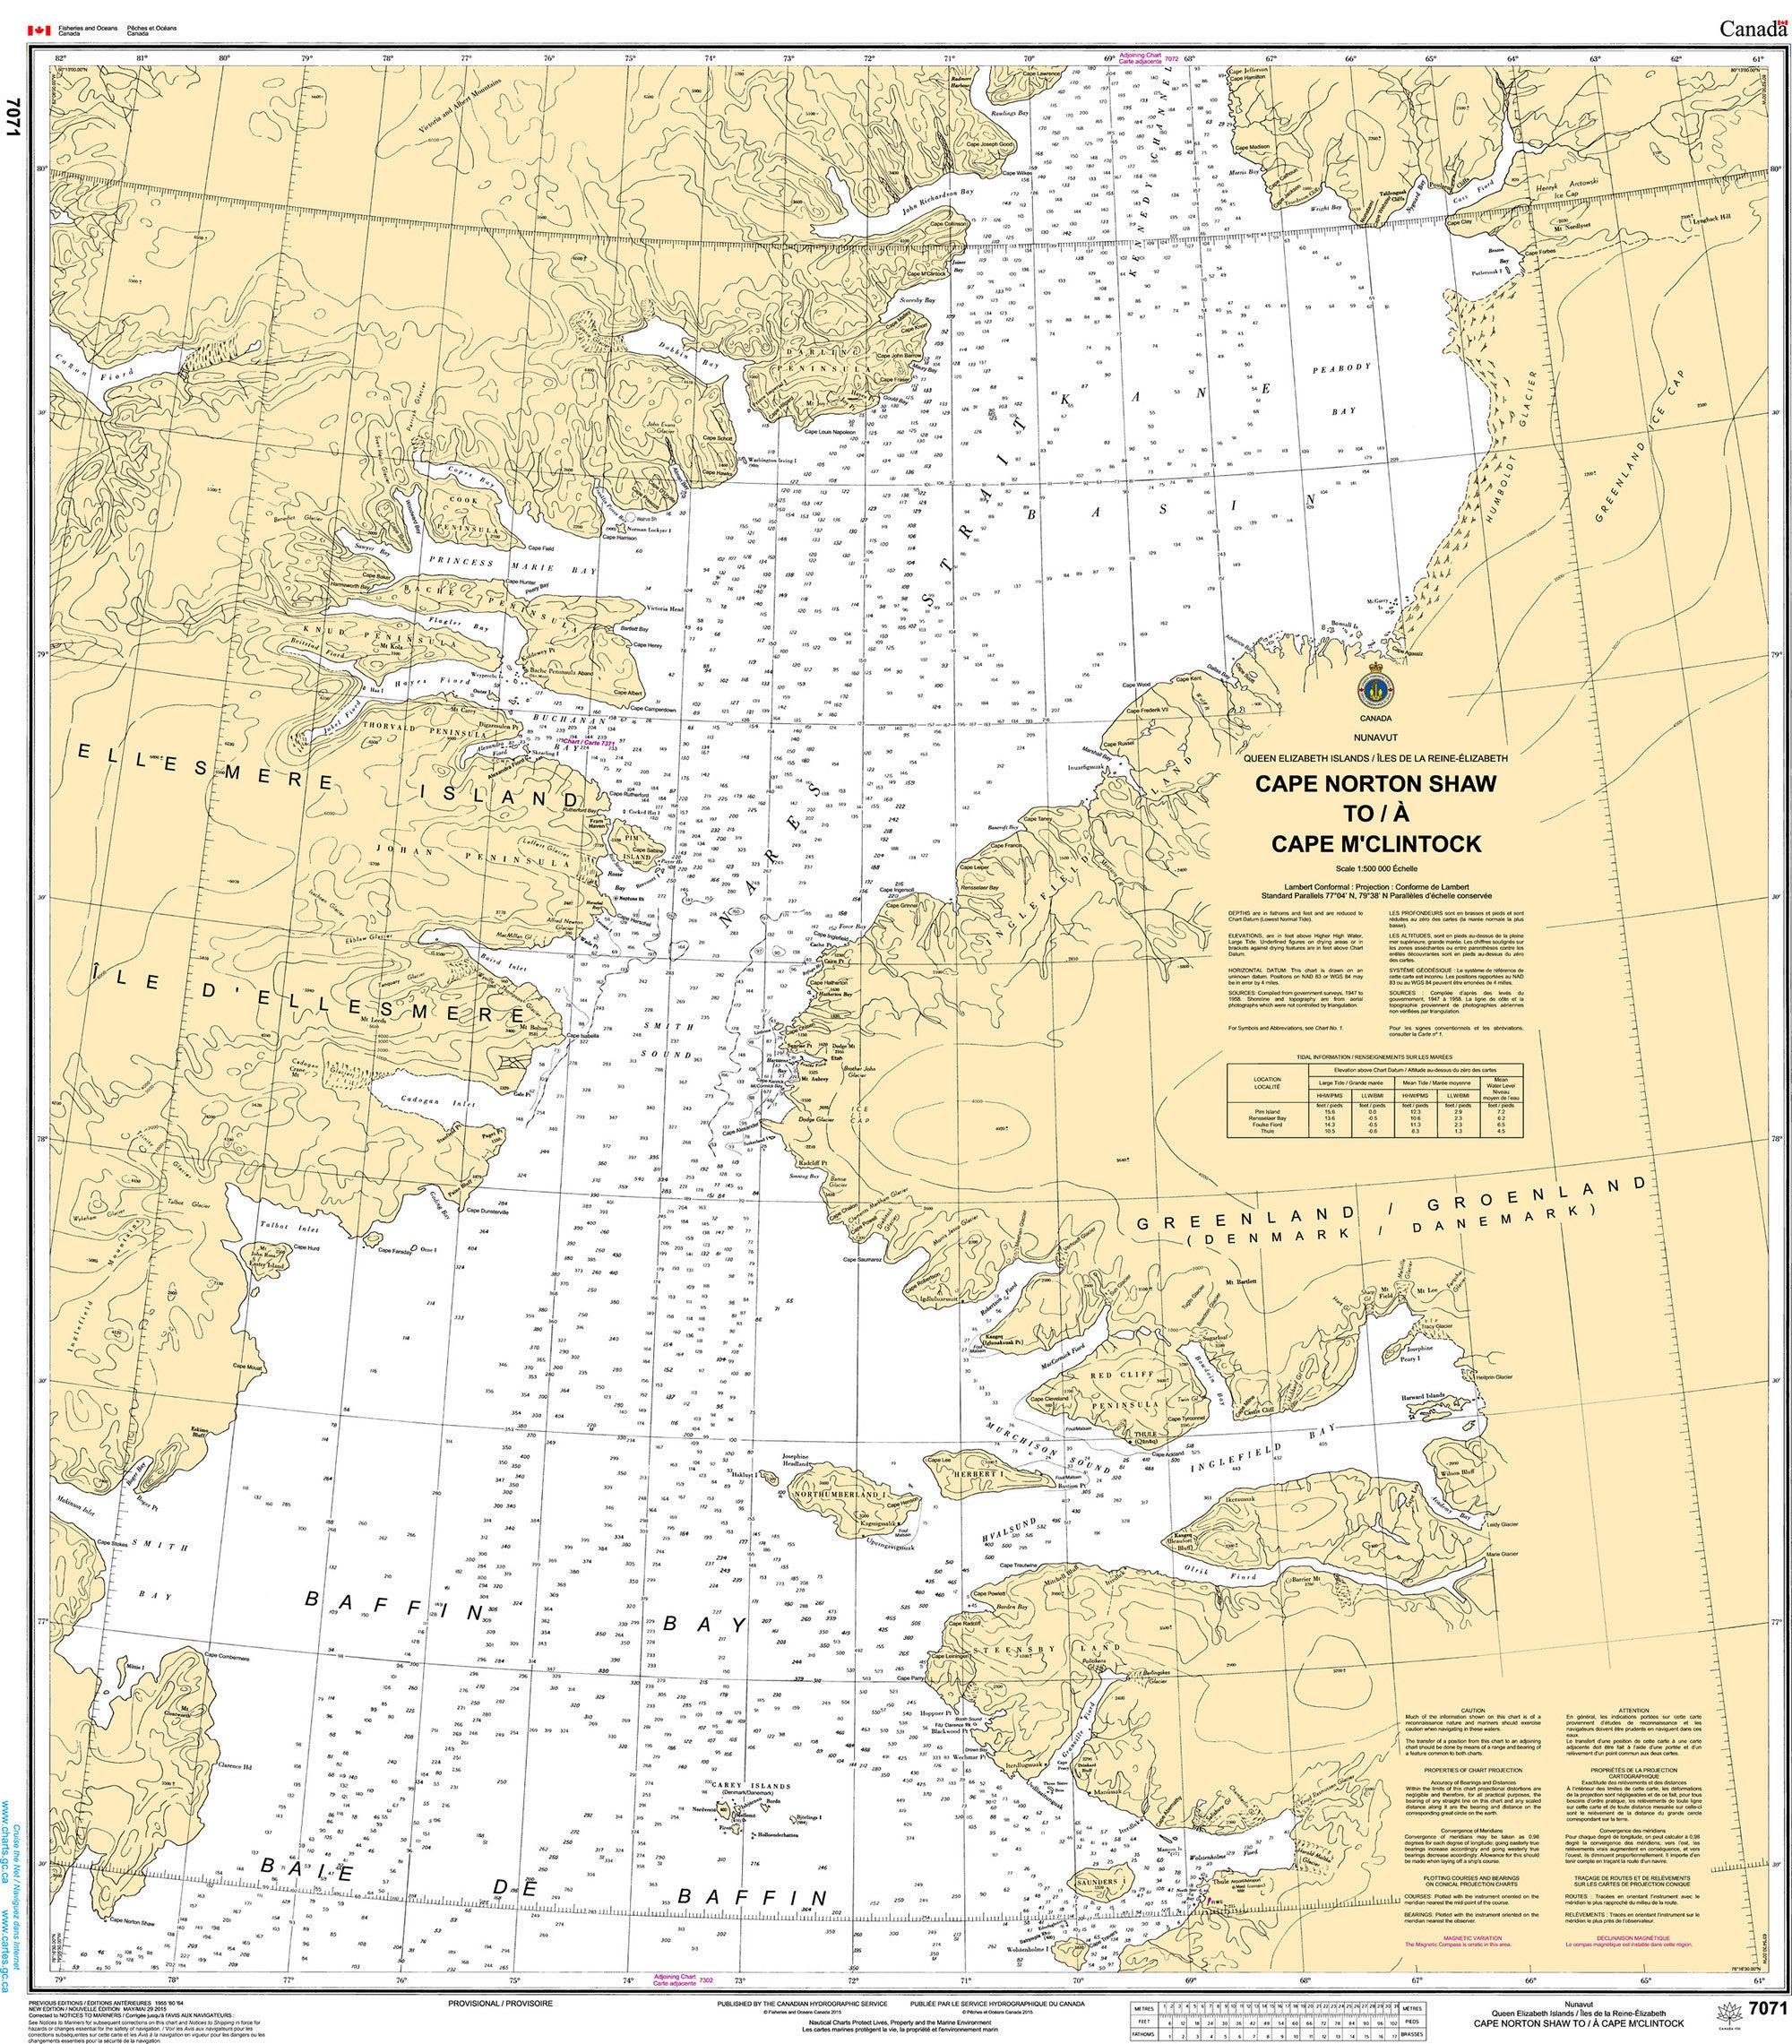 Canadian Hydrographic Service Nautical Chart CHS7071: Cape Norton Shaw to Cape M'Clintock